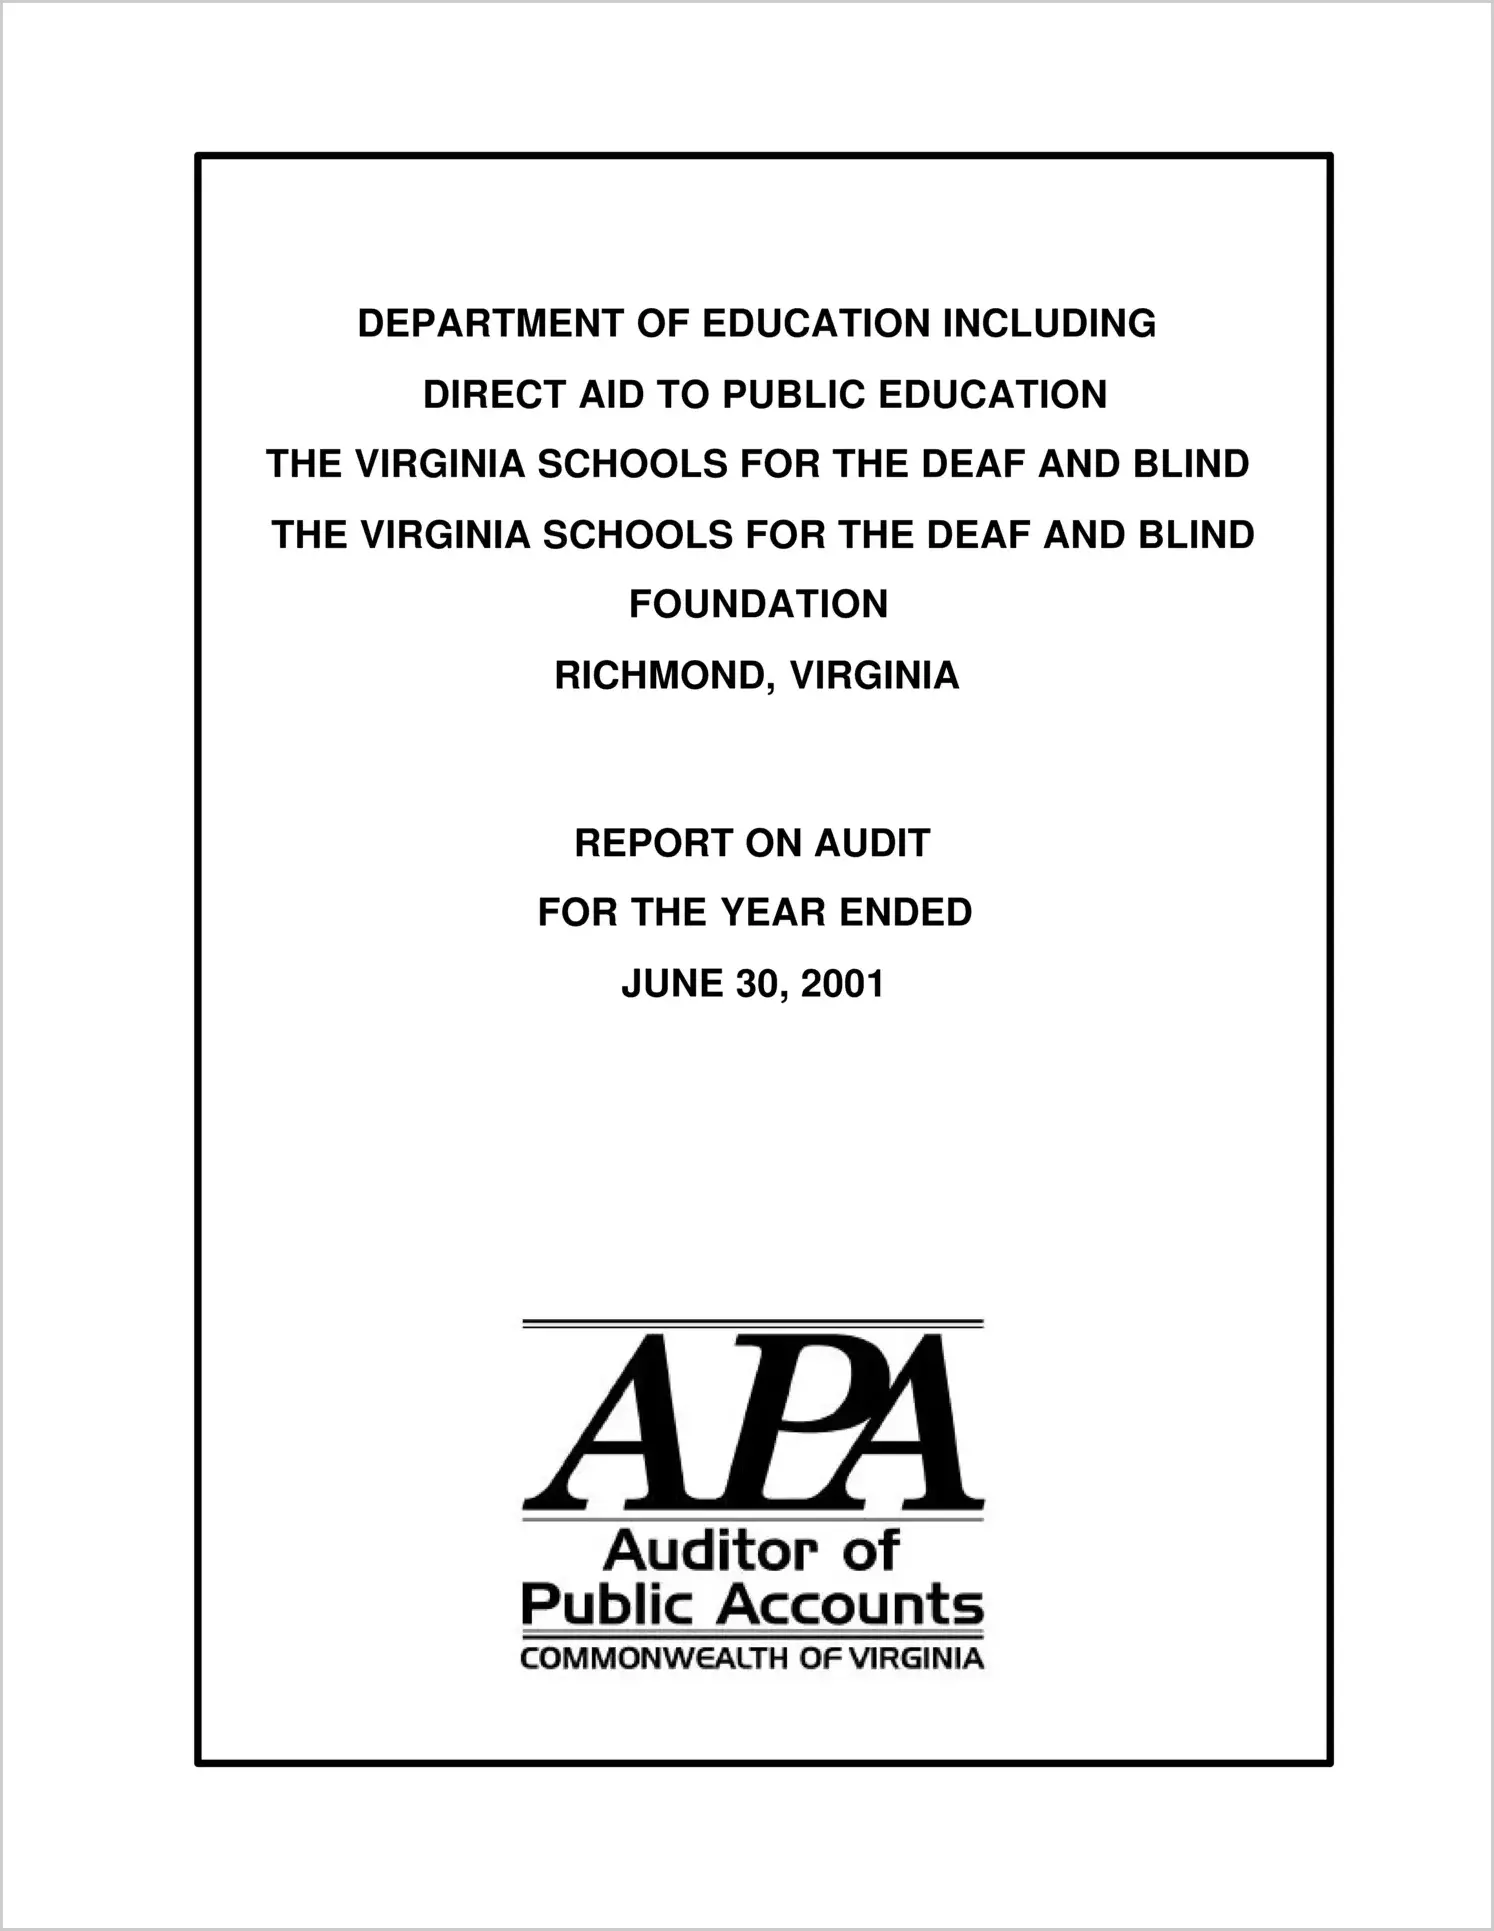 Department of Education Including Direct Aid to Public Education, the Virginia Schools for the Deaf and Blind, and the Virginia Schools for the Deaf and Blind Foundation for the year ended June 30, 2001